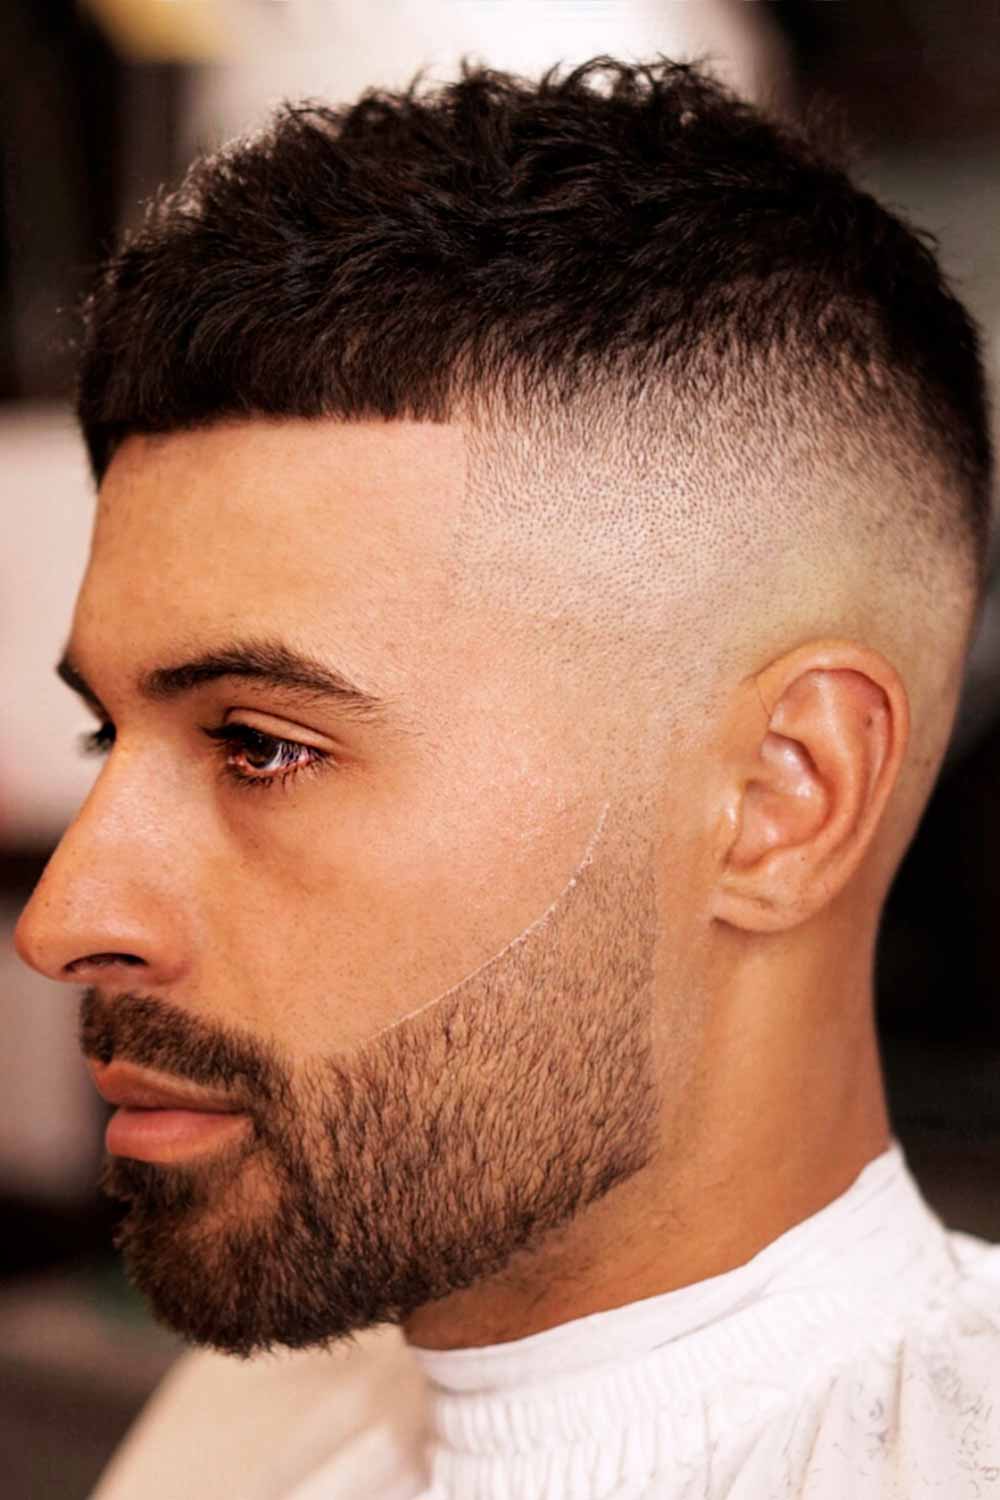 High And Tight - The Best Military Haircut In 2021 | MensHaircuts.com